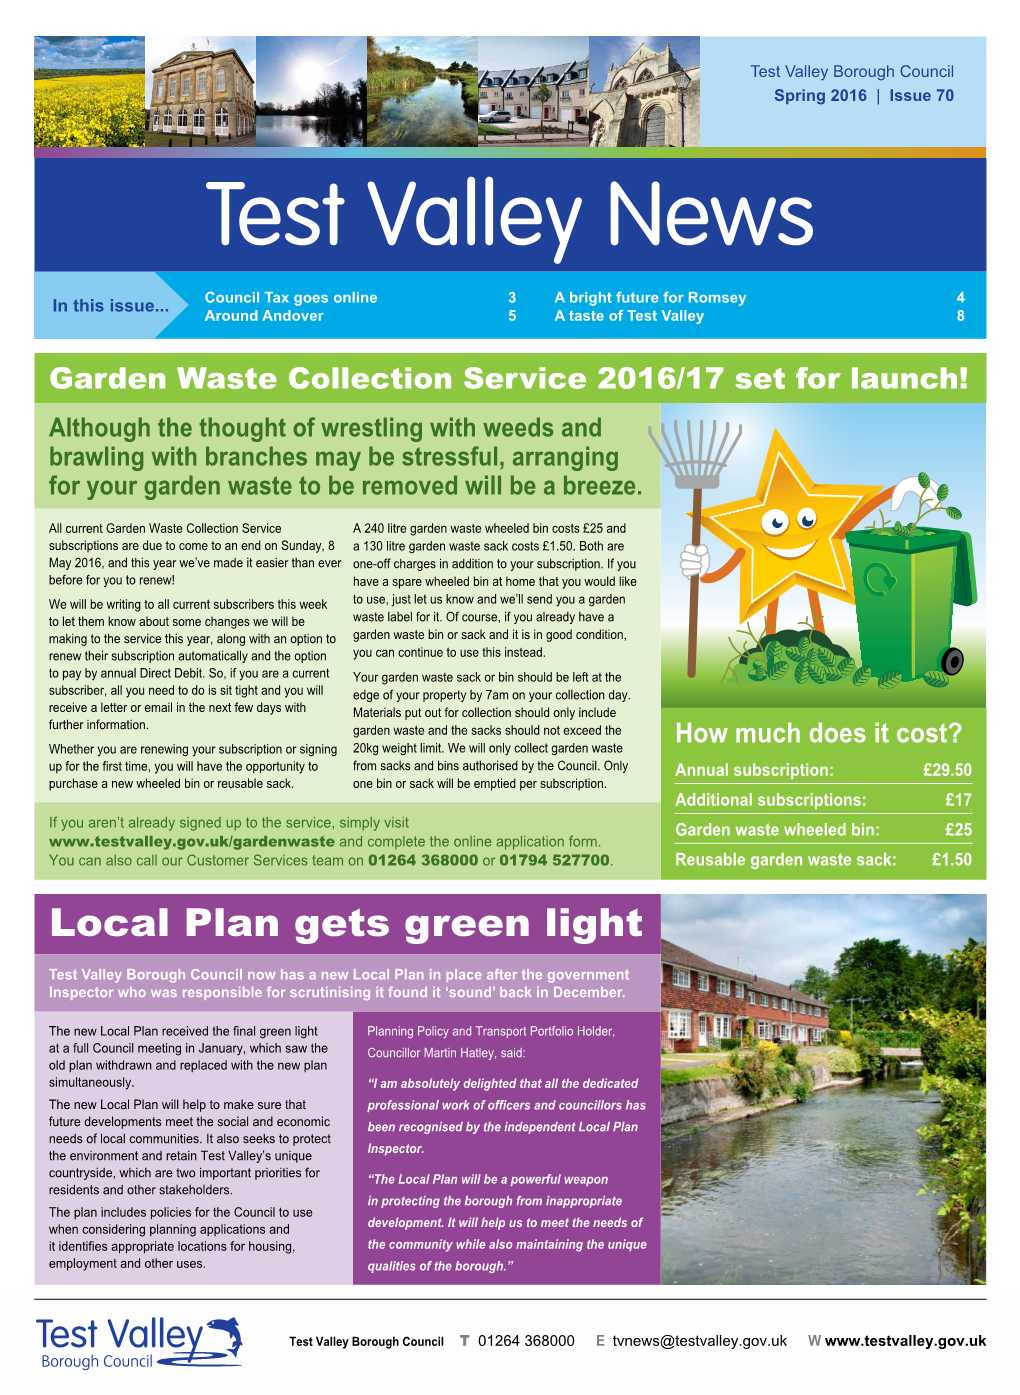 Test Valley News Edition 70 Spring 2016